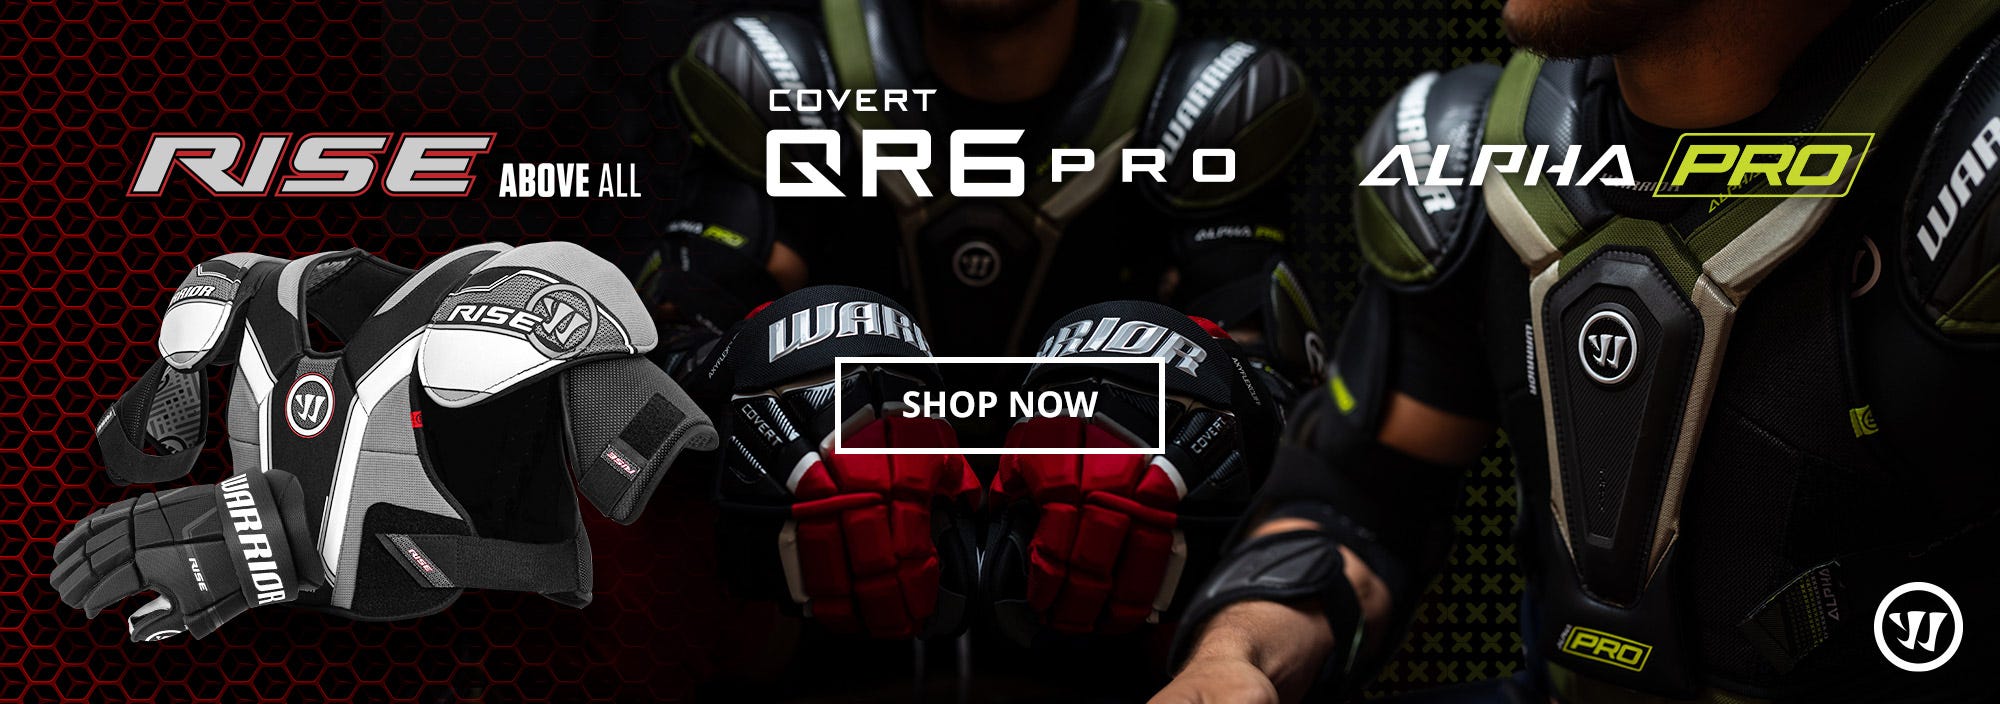 New Warrior Gear: Covert QR6 Gloves, Alpha Pro & LT Protective, and Rise Protective